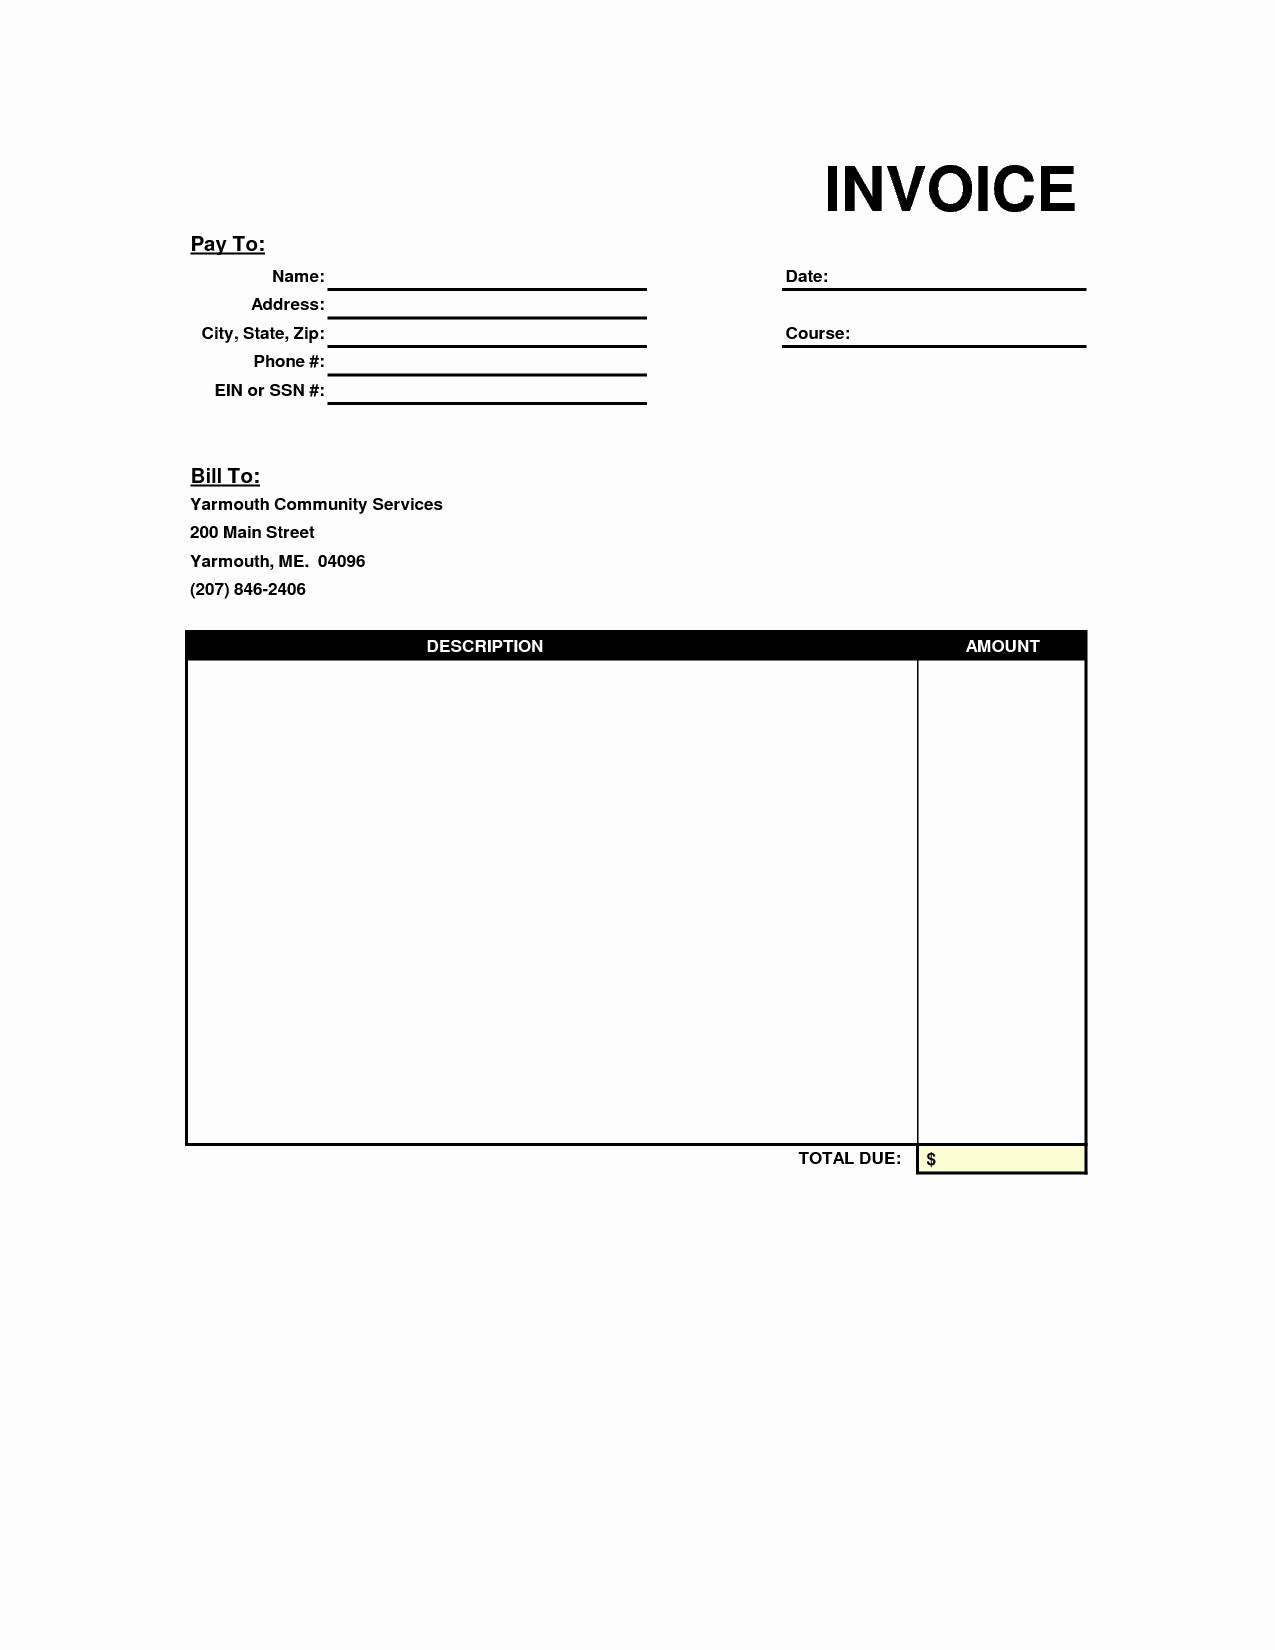 Copy Of An Invoice Template Luxury Copy Blank Invoice Invoice Template Ideas